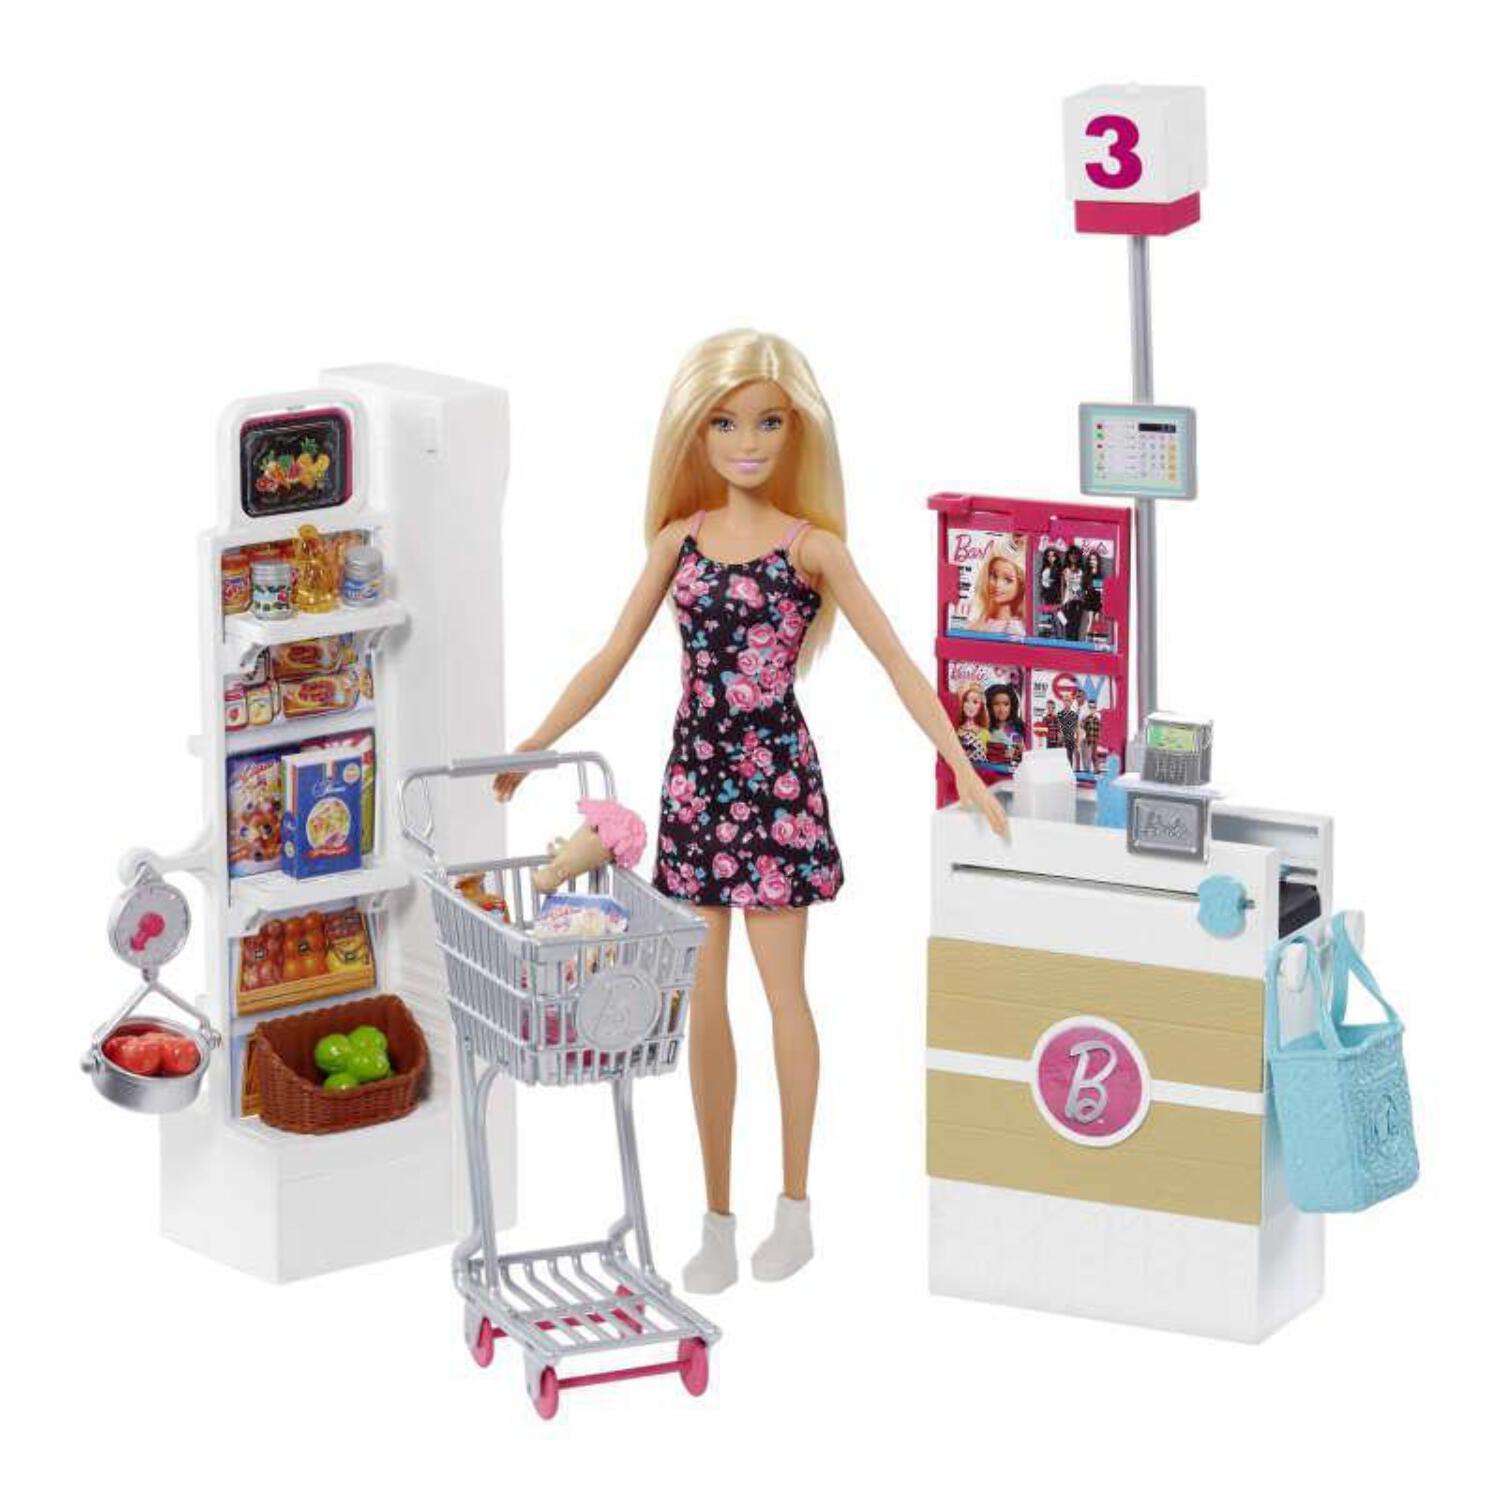 Barbie Doll and Supermarket Playset with 25 Grocery Store and Food-Themed Accessories - image 1 of 7